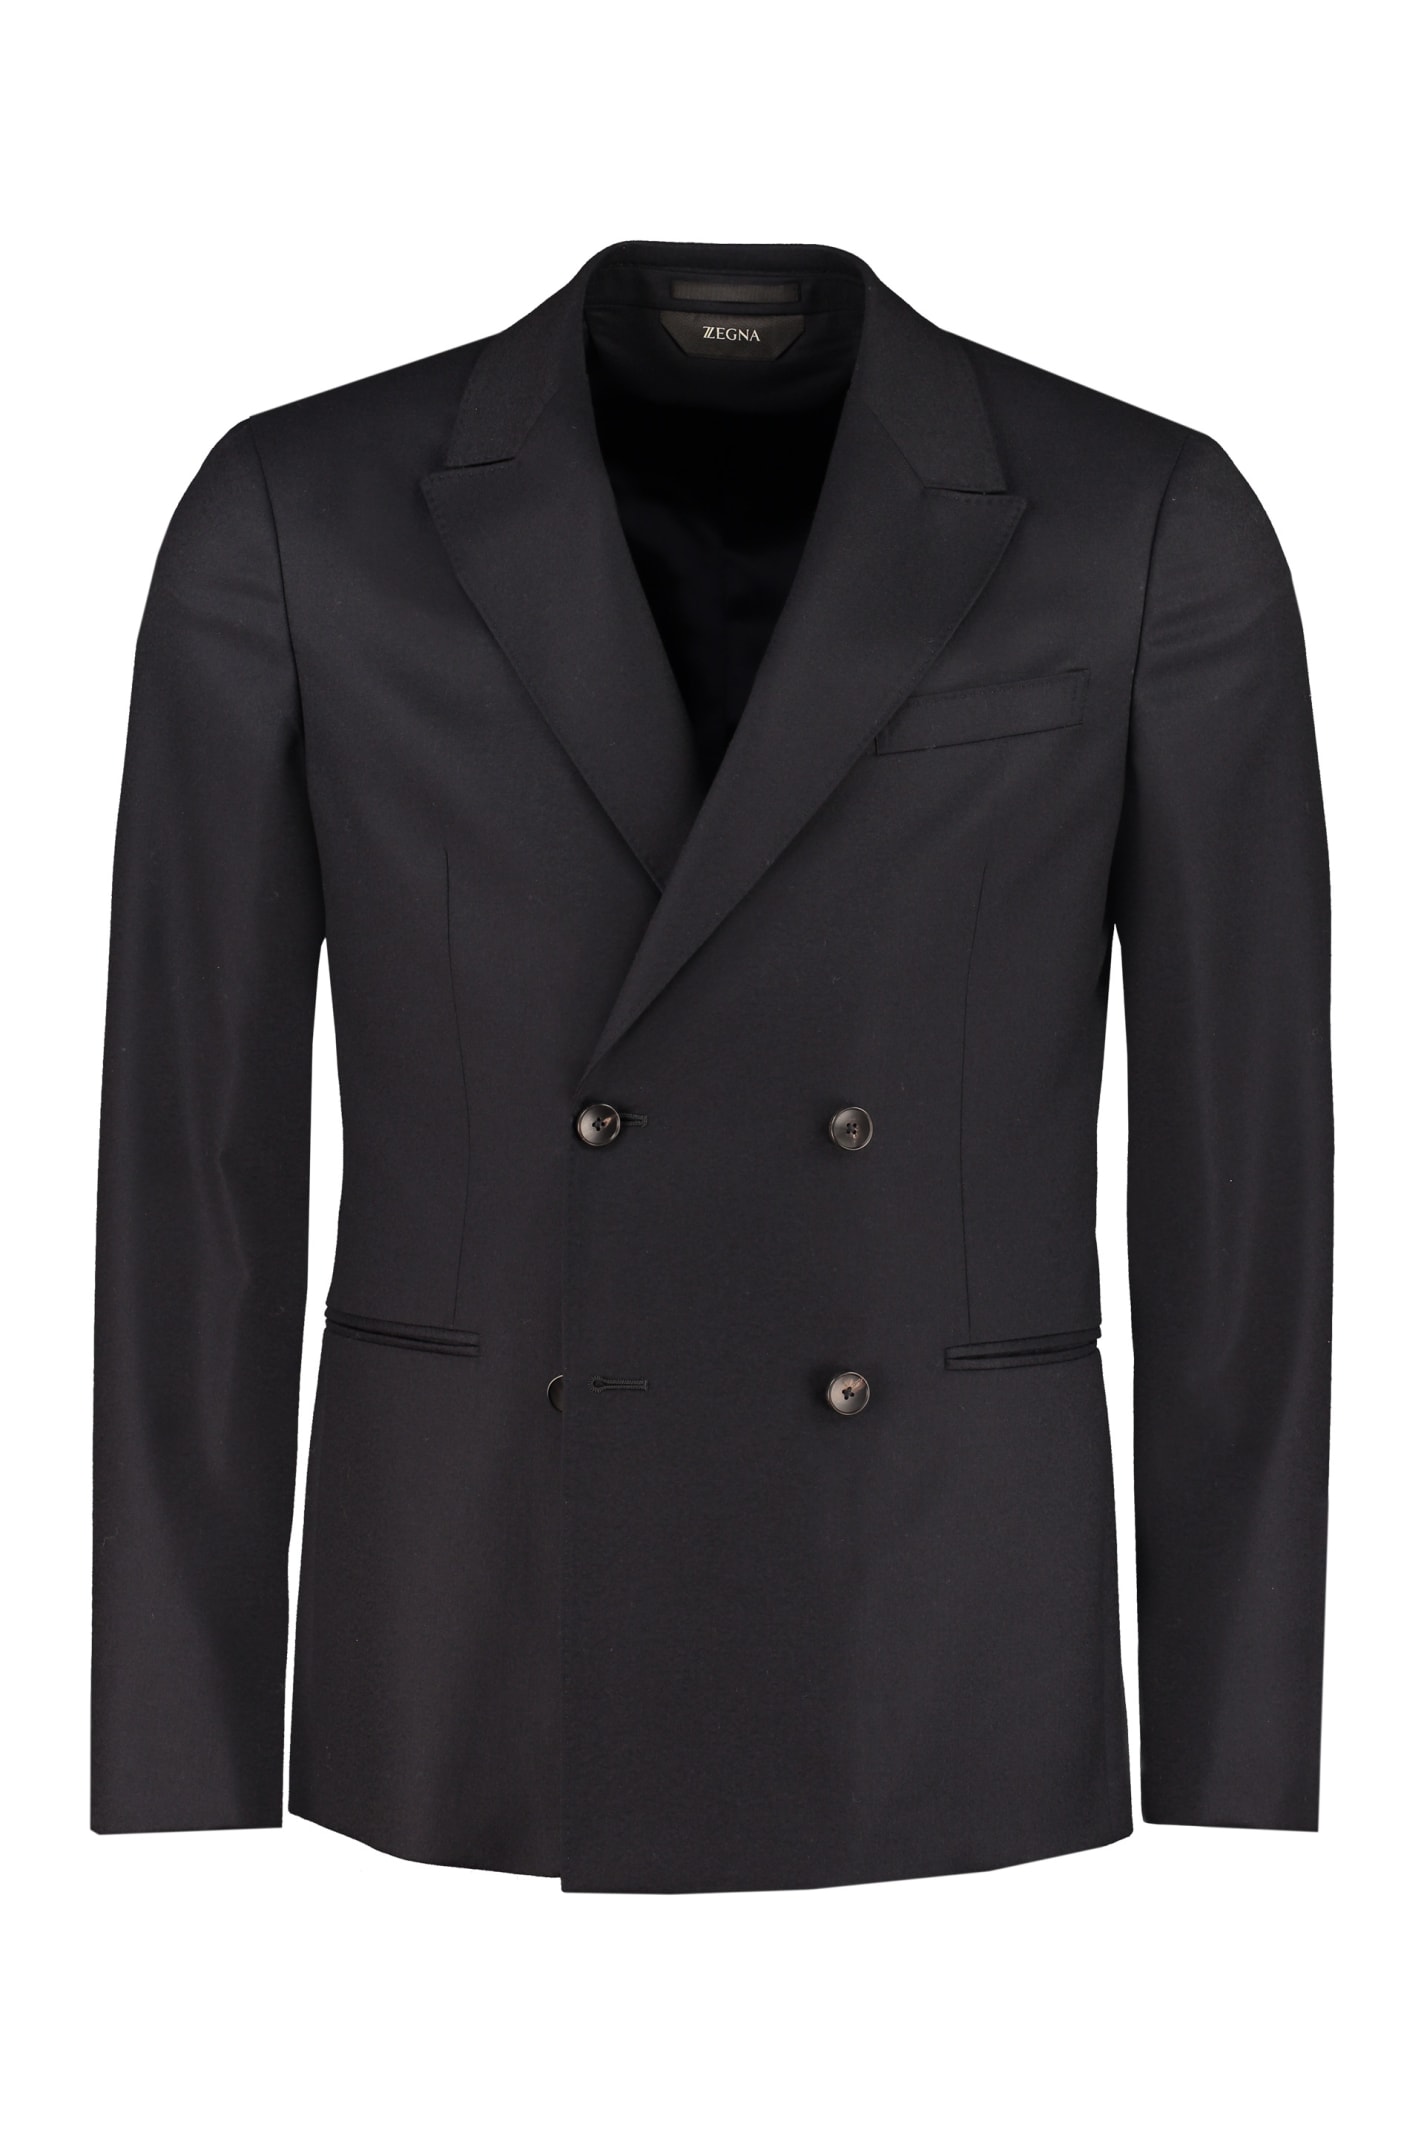 Z Zegna Double-breasted Wool Jacket